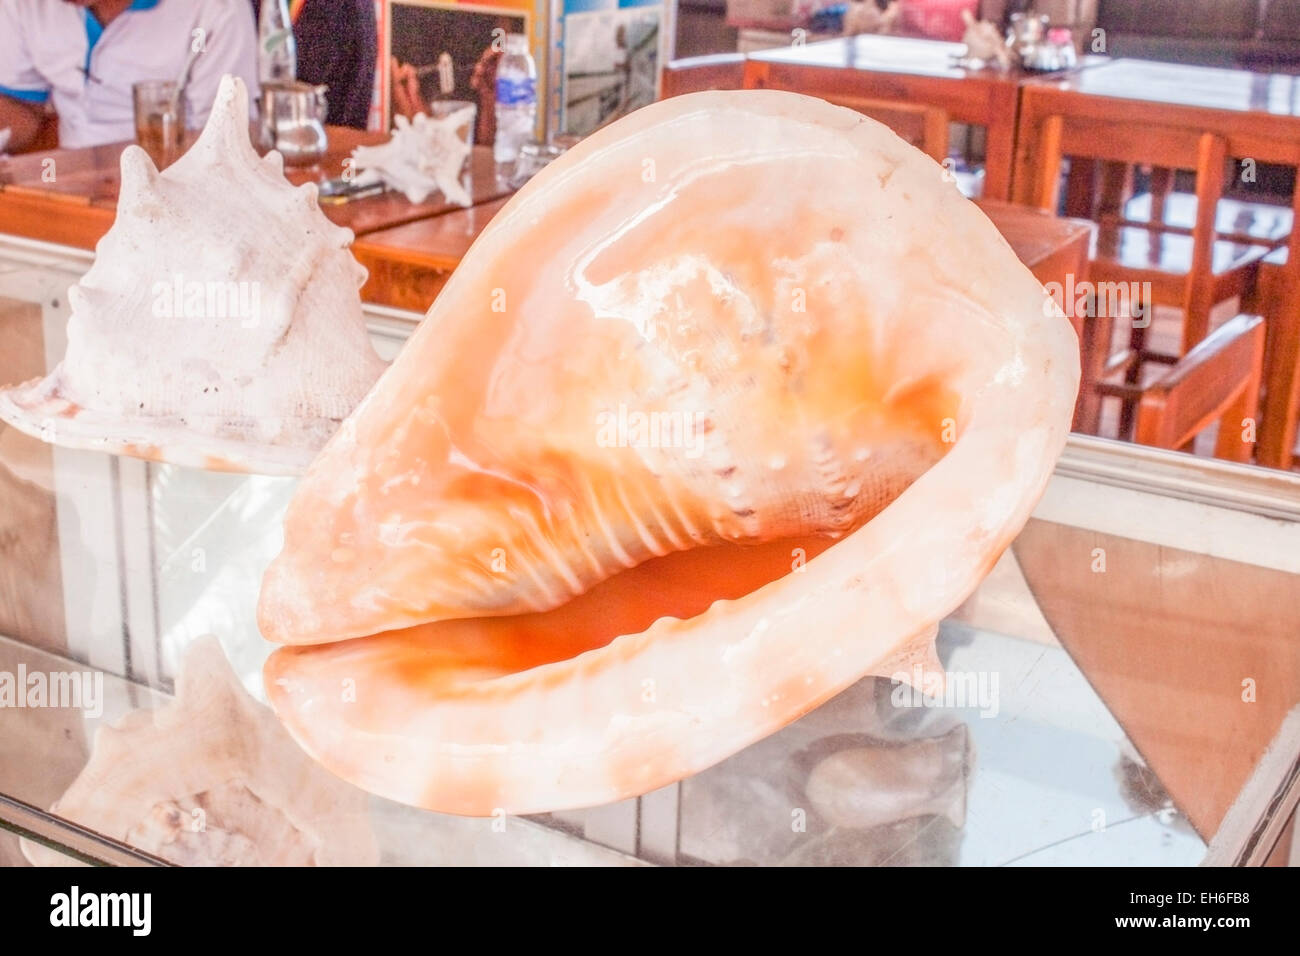 A big orange shell, on a glass table Stock Photo